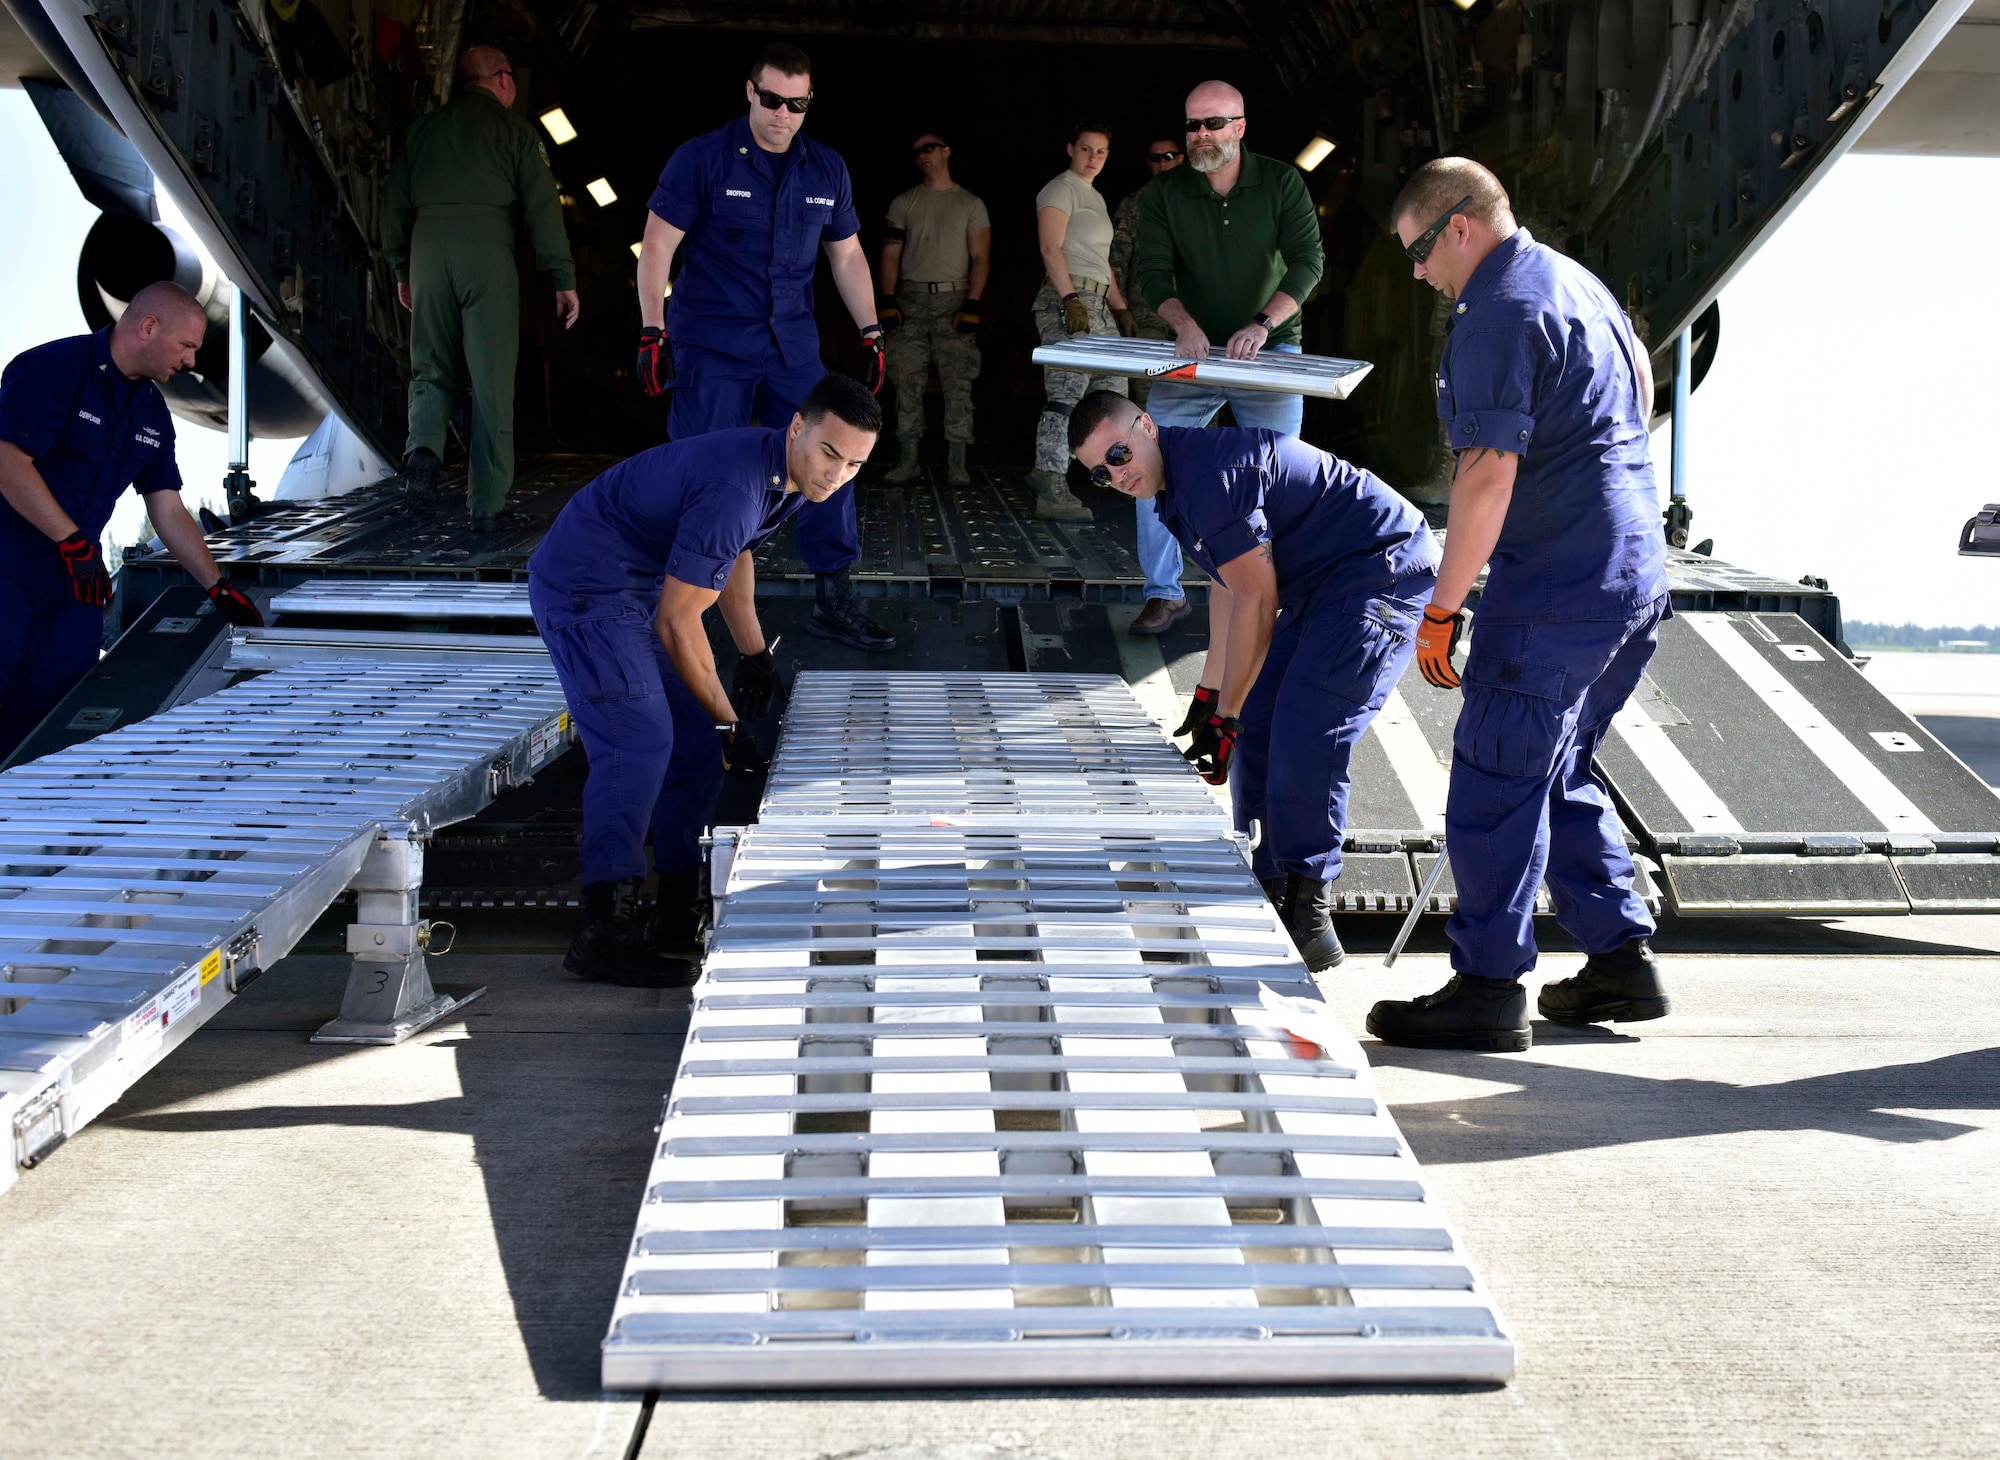 Members of Coast Guard Maritime Safety and Security Team Miami set up ramps on an Air Force C-17 in Homestead, Florida, on Mar. 8, 2017. An Air Force C-17 airplane transported two MSST boats from Homestead to Tampa to highlight the value of using joint service airlift operations to transport assets over large distances as part of exercise Patriot Sands.